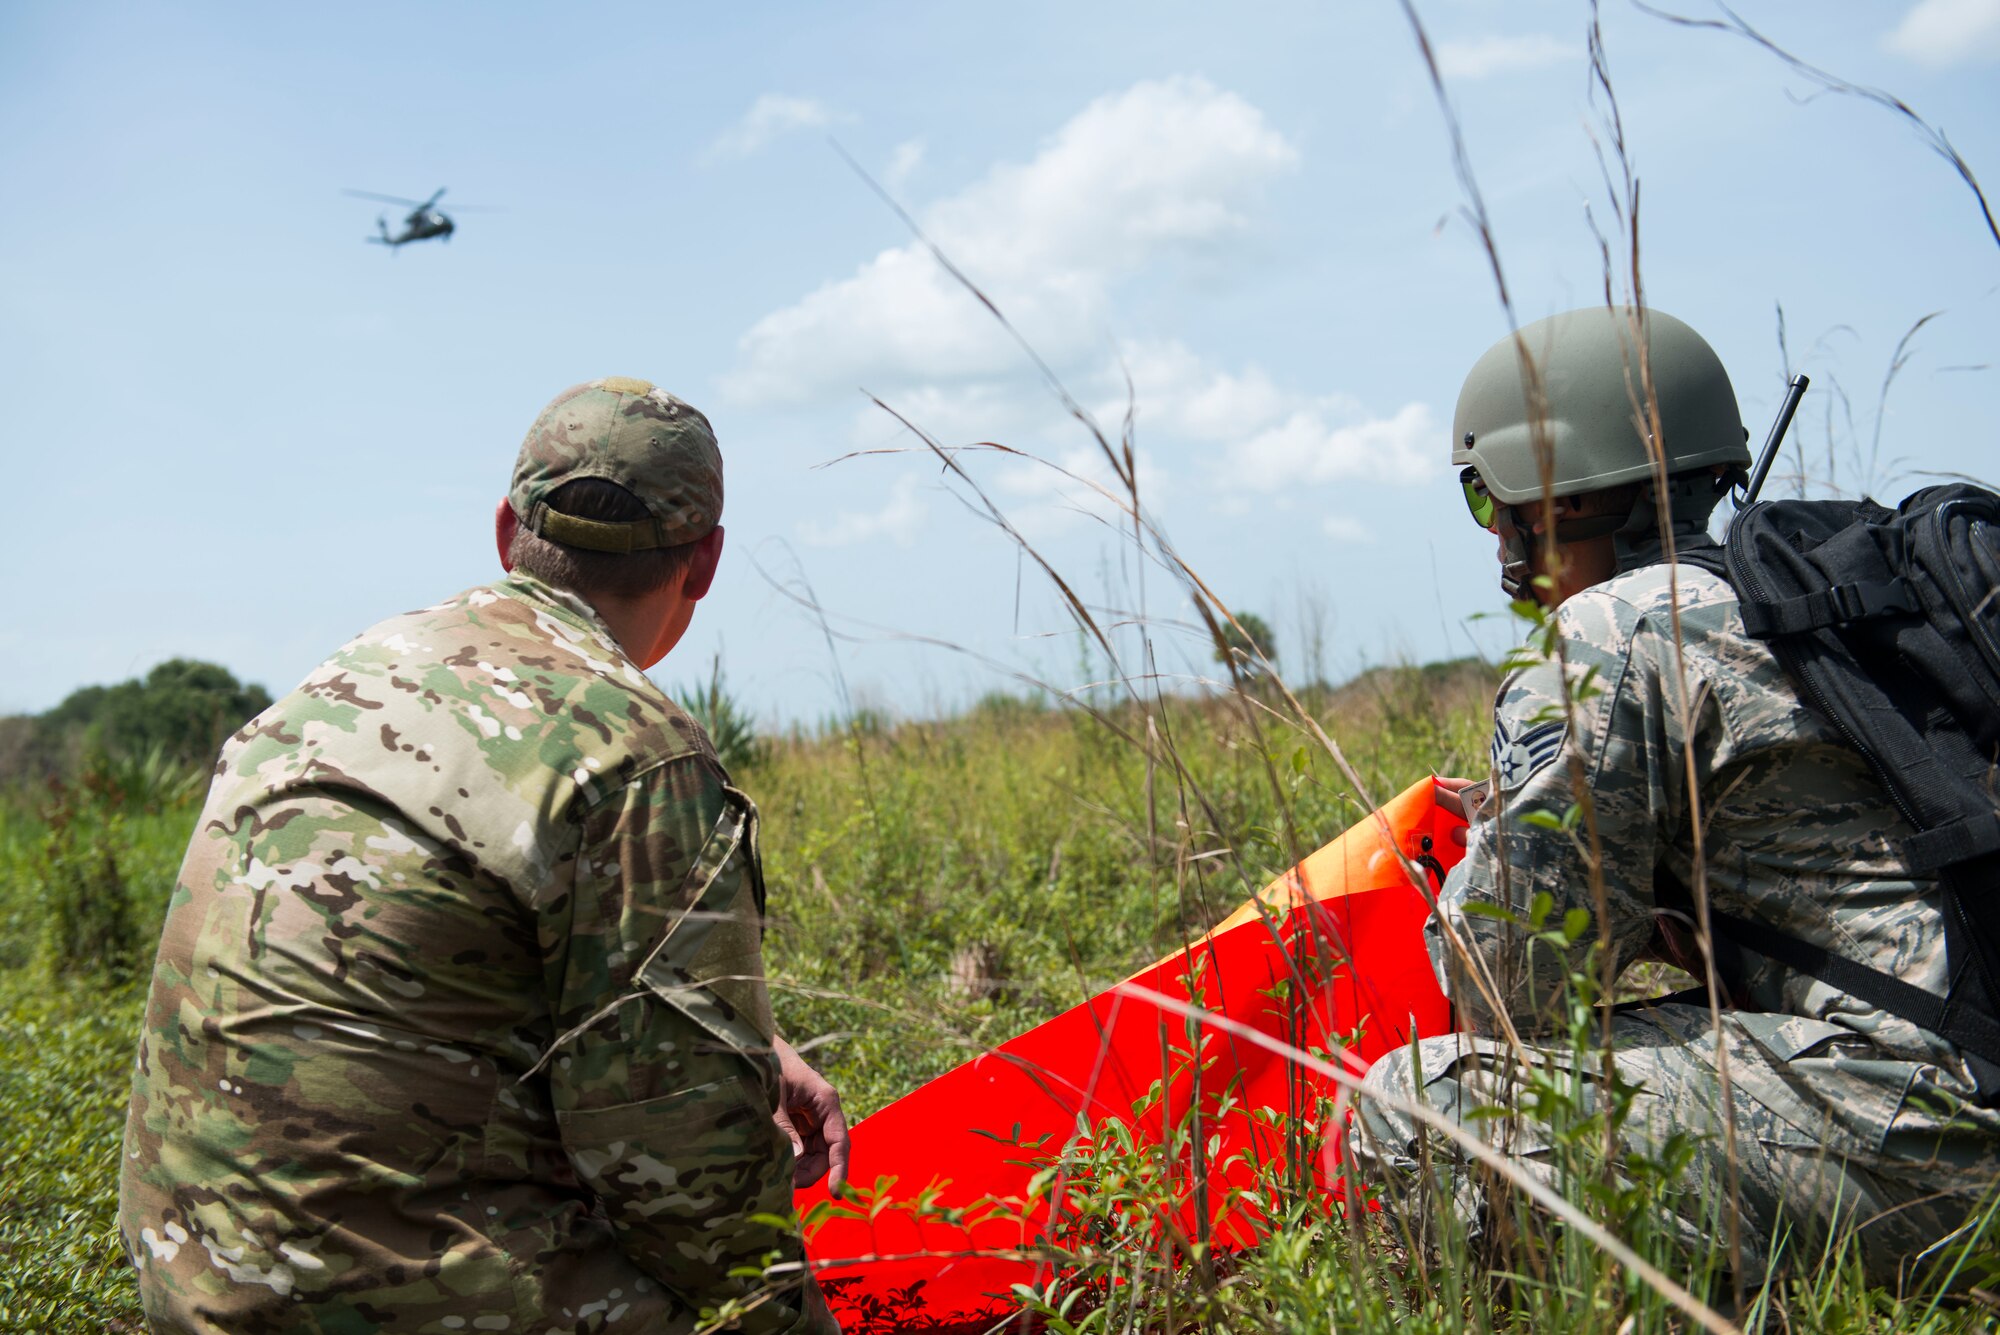 U.S. Air Force Staff Sgt. Ryan Hall, left, 18th Air Support Operations Group Survival, Escape, Resistance and Evasion specialist, helps Senior Airman Michael Cruz, 23d Operations Support Squadron targets intelligence specialist, signal an HH-60G Pave Hawk during a personnel recovery scenario for Exercise DRAGON STRIKE June 11, 2015, near Avon Park Air Force Range, Fla. Hall and Cruz utilized a VS-17 panel, a specialized signaling device, to highlight their location. (U.S. Air Force photo by Airman 1st Class Dillian Bamman/Released)